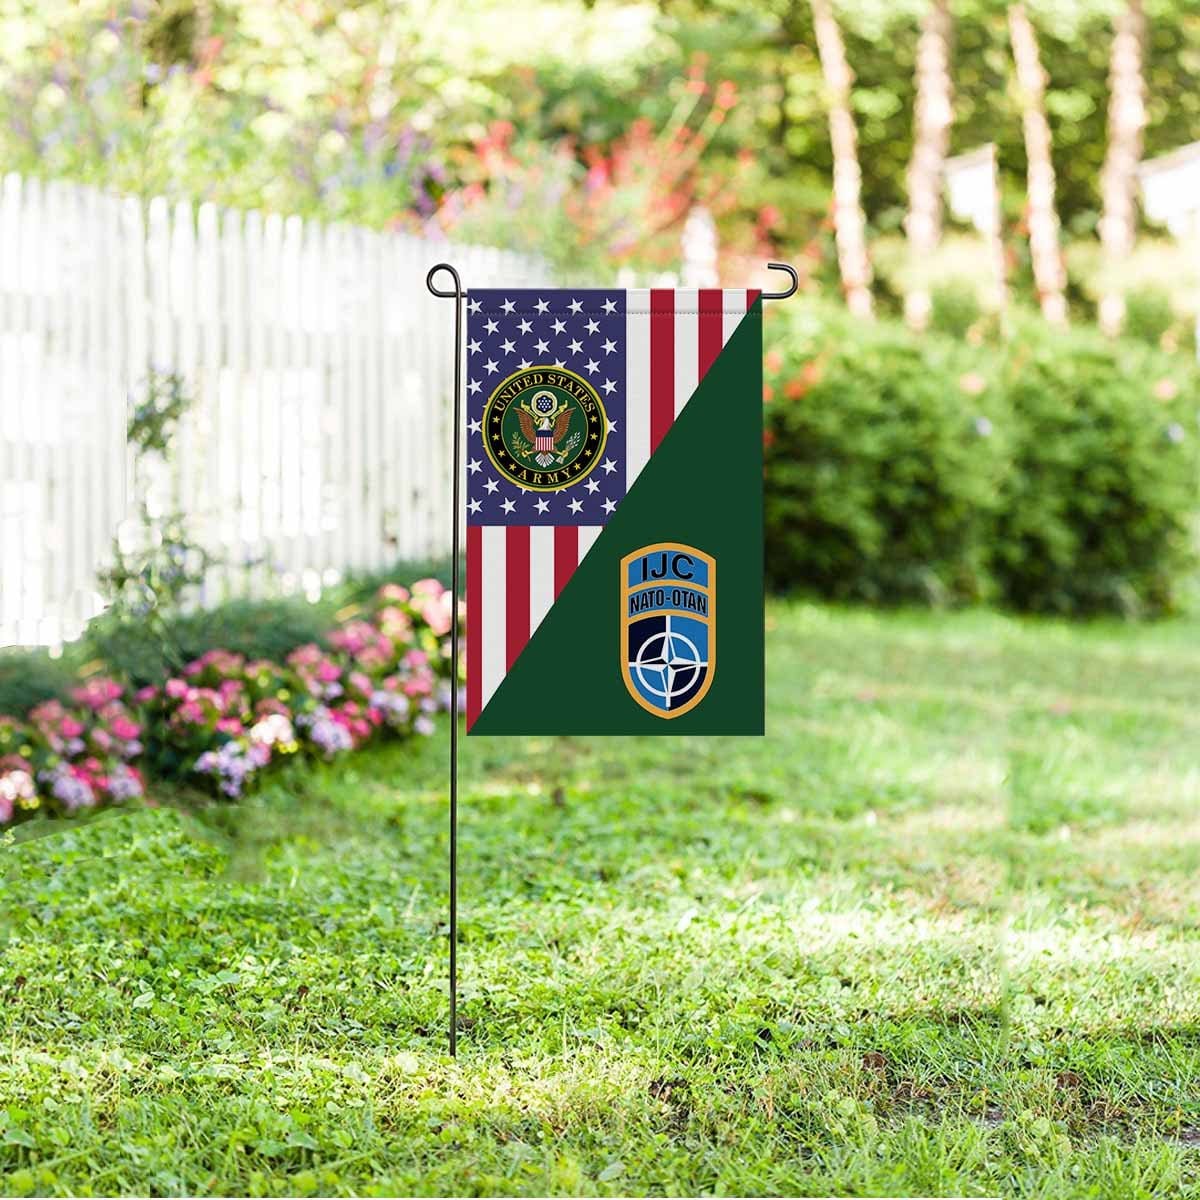 US ARMY CSIB NATO ISAF JOINT COMMAND IN AFGHANISTAN Garden Flag/Yard Flag 12 inches x 18 inches Twin-Side Printing-GDFlag-Army-CSIB-Veterans Nation